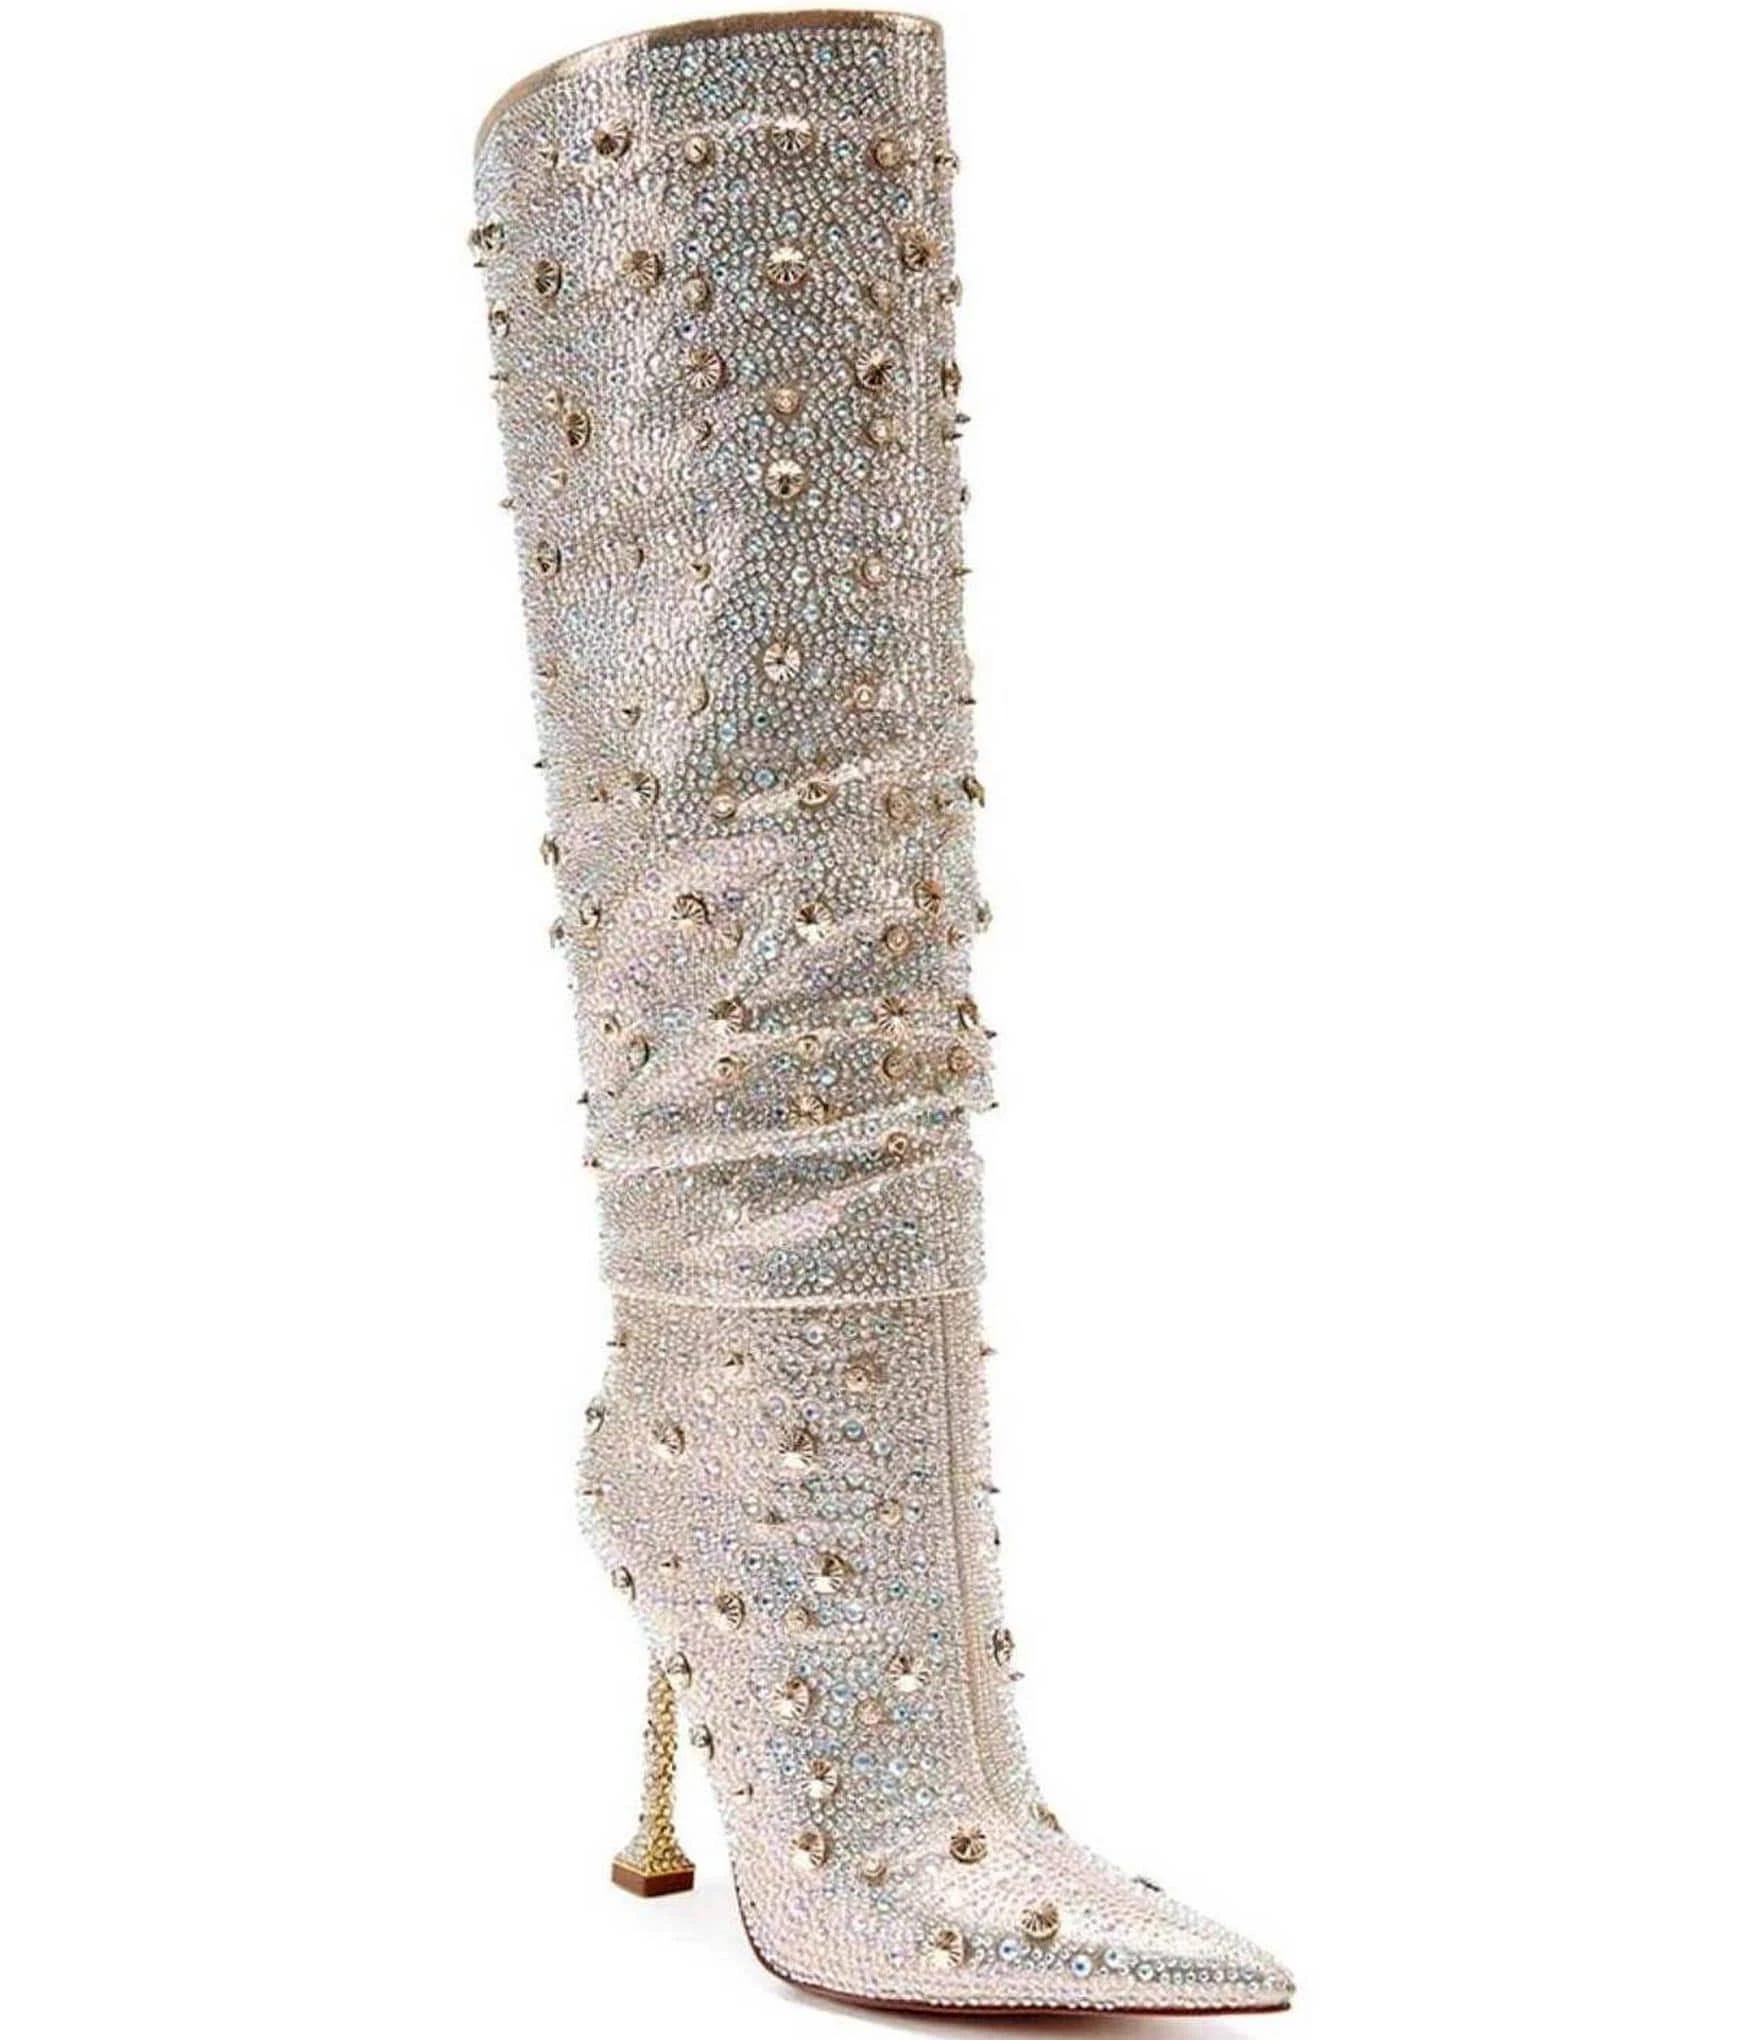 Crystal Rhinestone Studded Stiletto Knee High Boots in Gold | Image